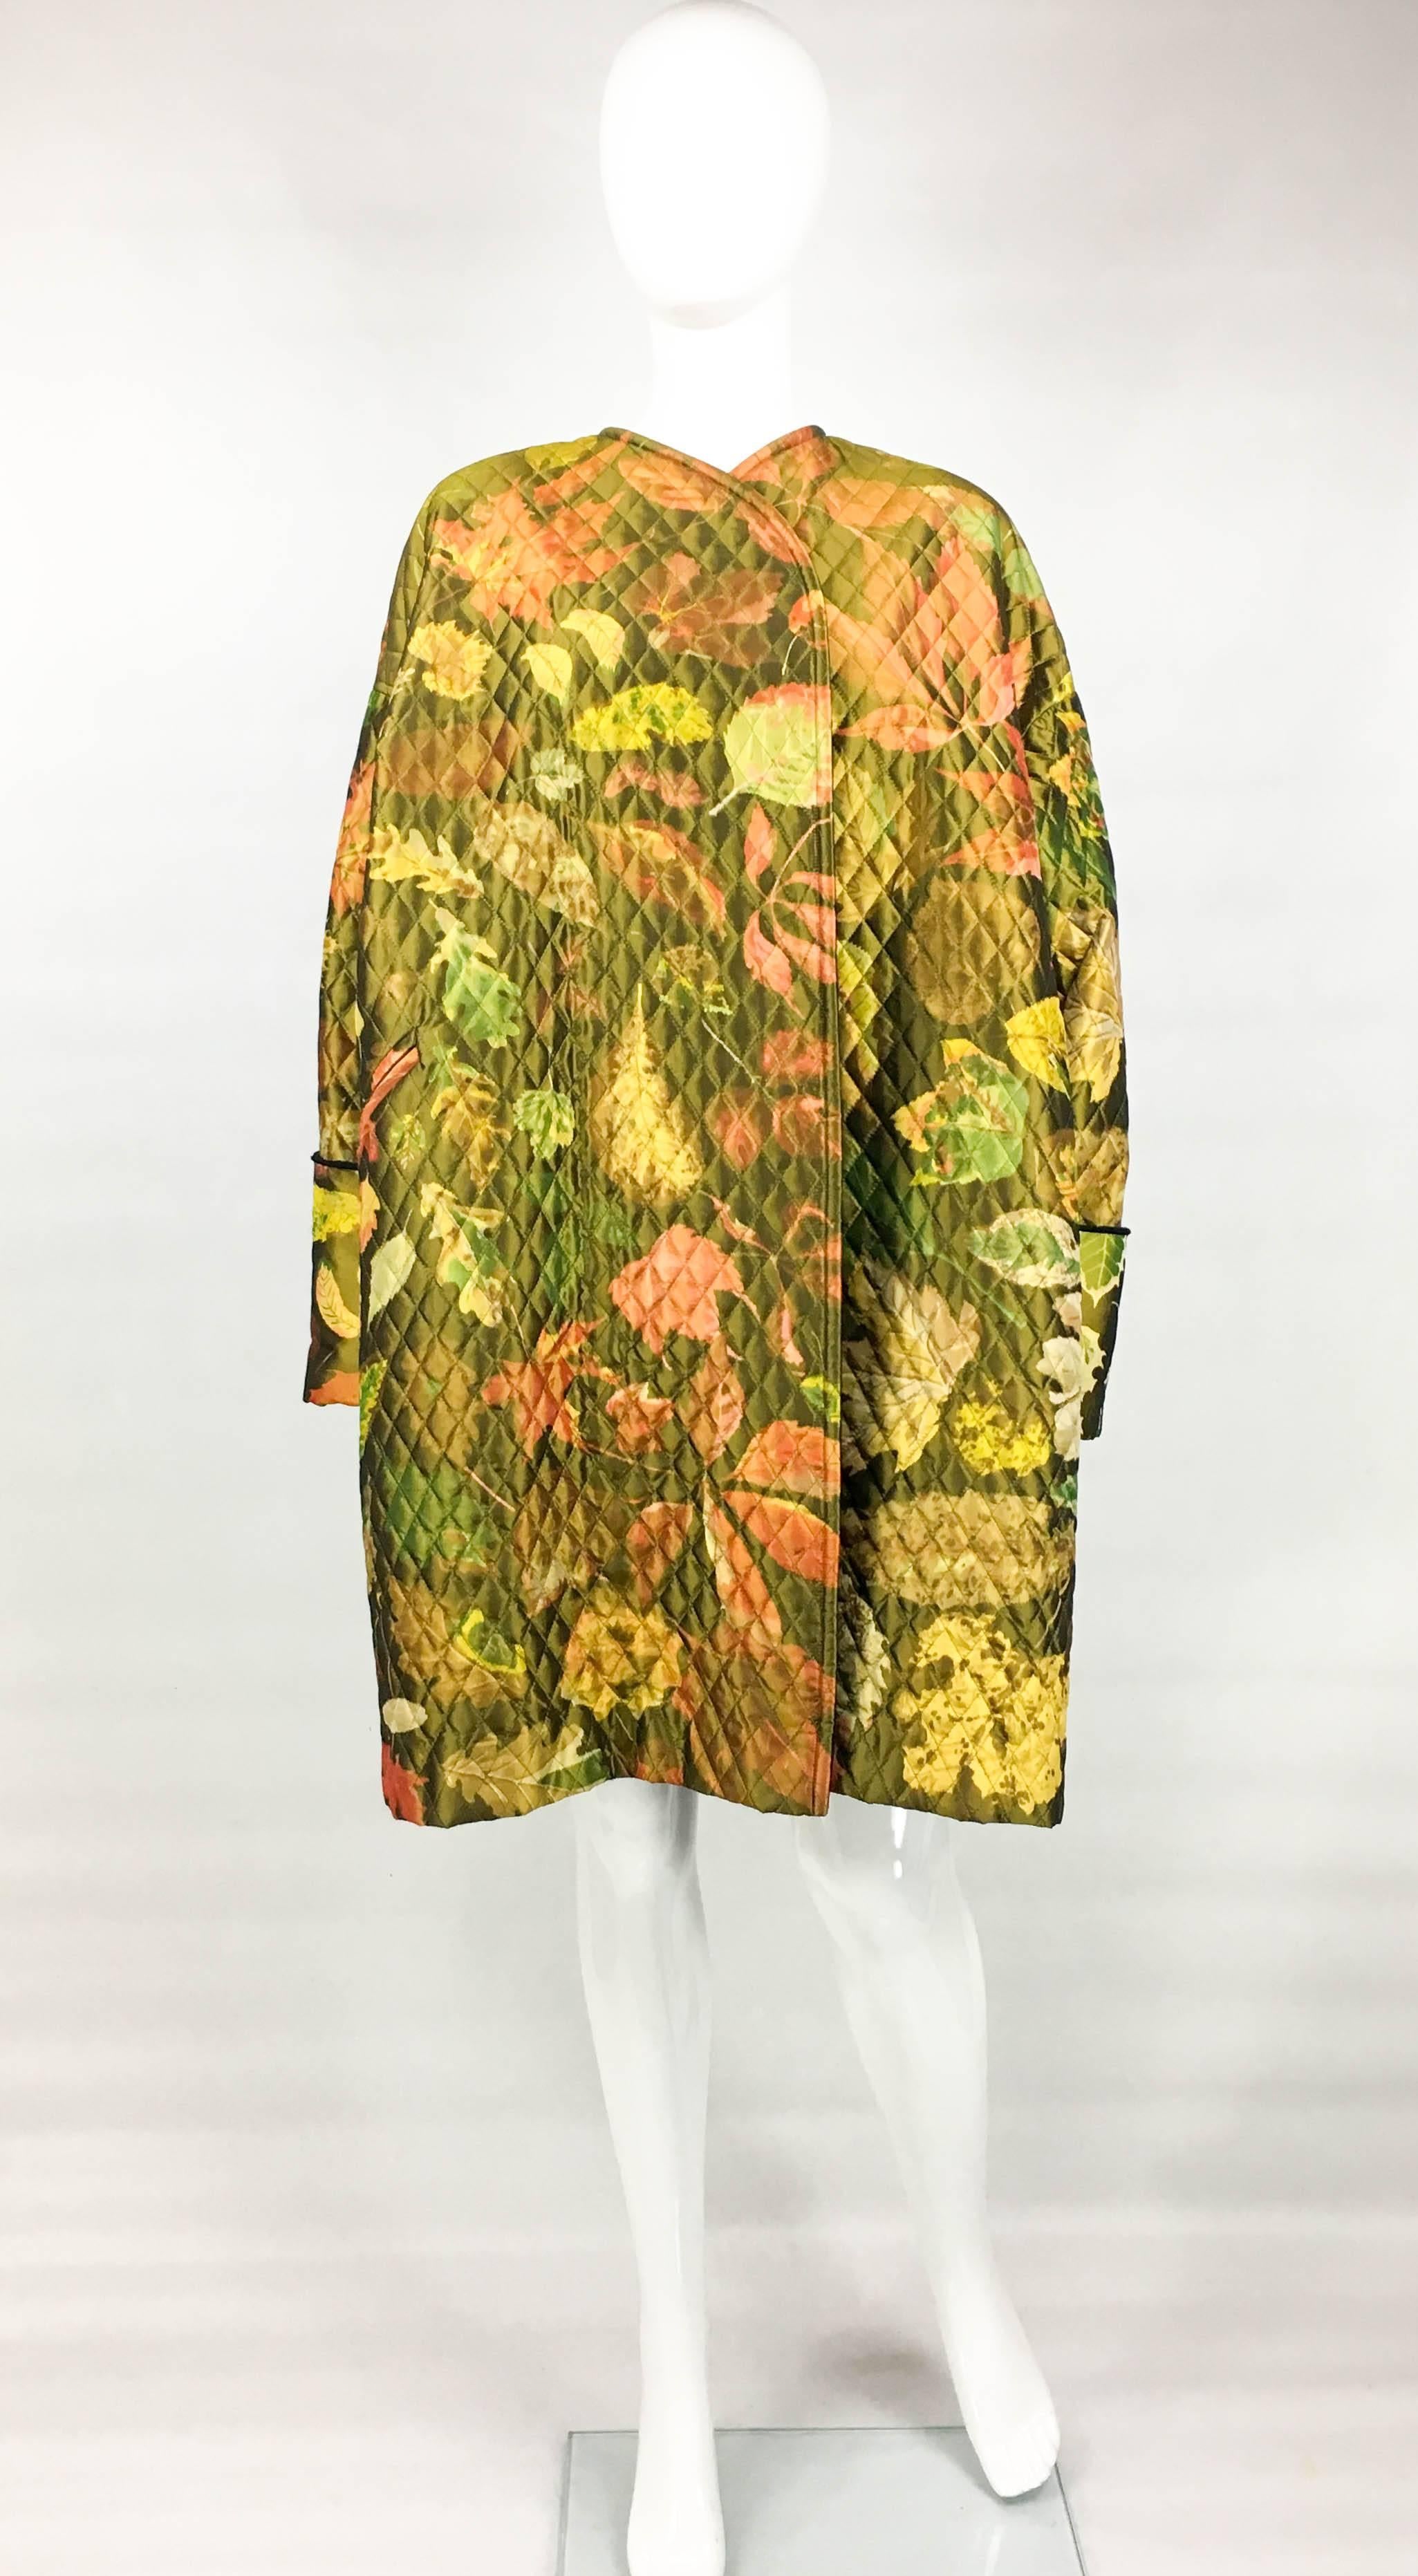 Vintage Hermes Printed Silk Coat. This stunning coat by Hermes dates back from the 1980’s. It is made in printed silk in autumnal shades with foliage pattern. The oversized open-closure coat is quilted and lined in black cashmere fleece. A fabulous